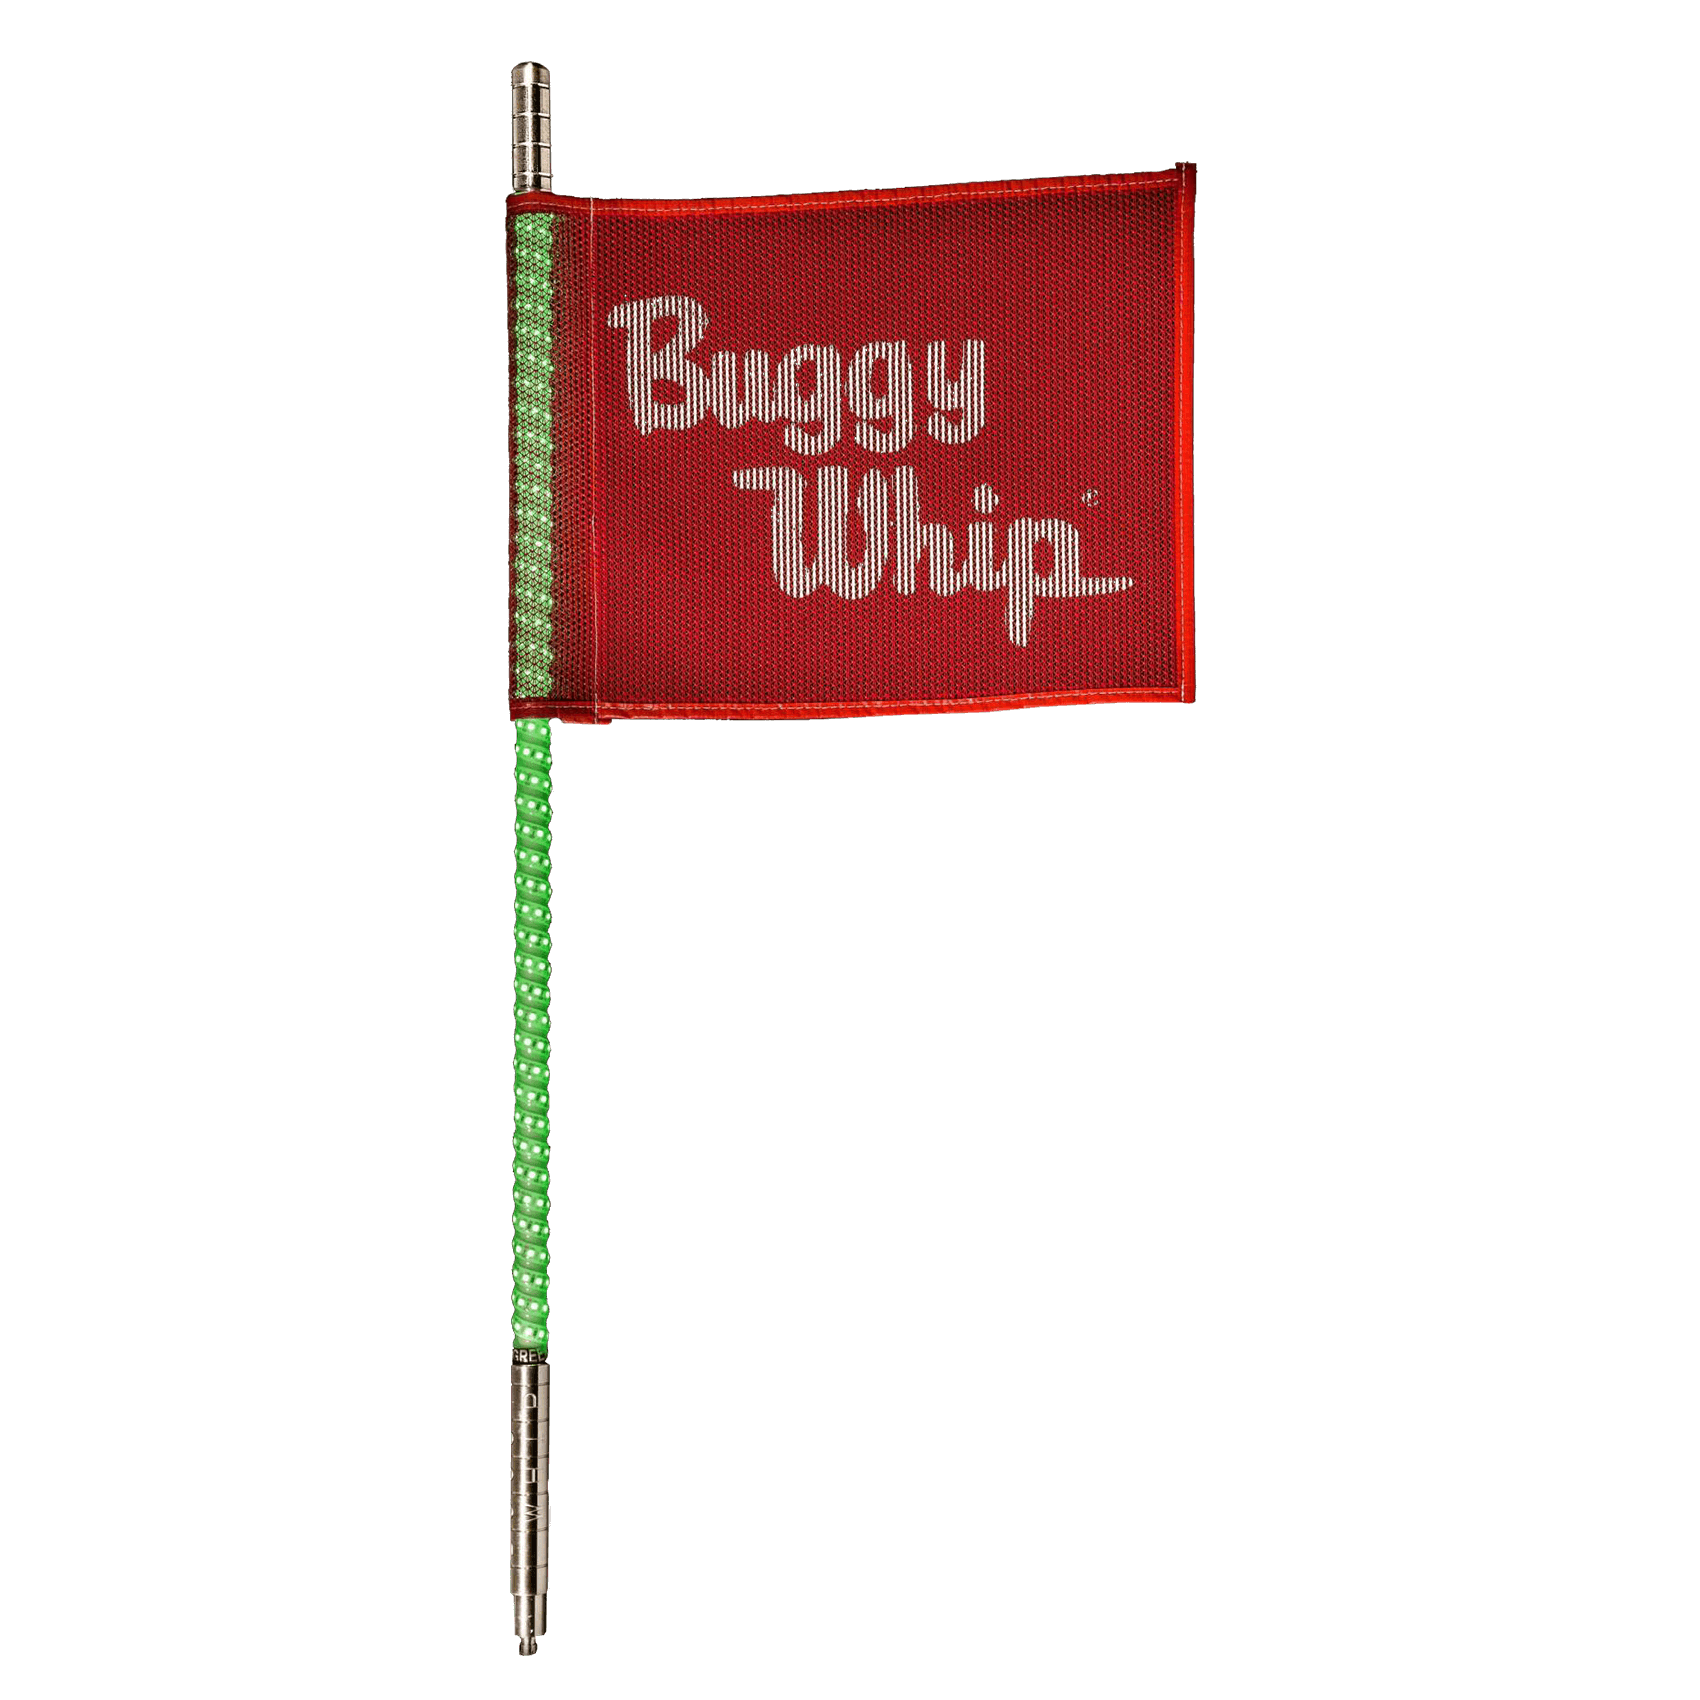 6' LED Whip with Flag | Buggy Whip